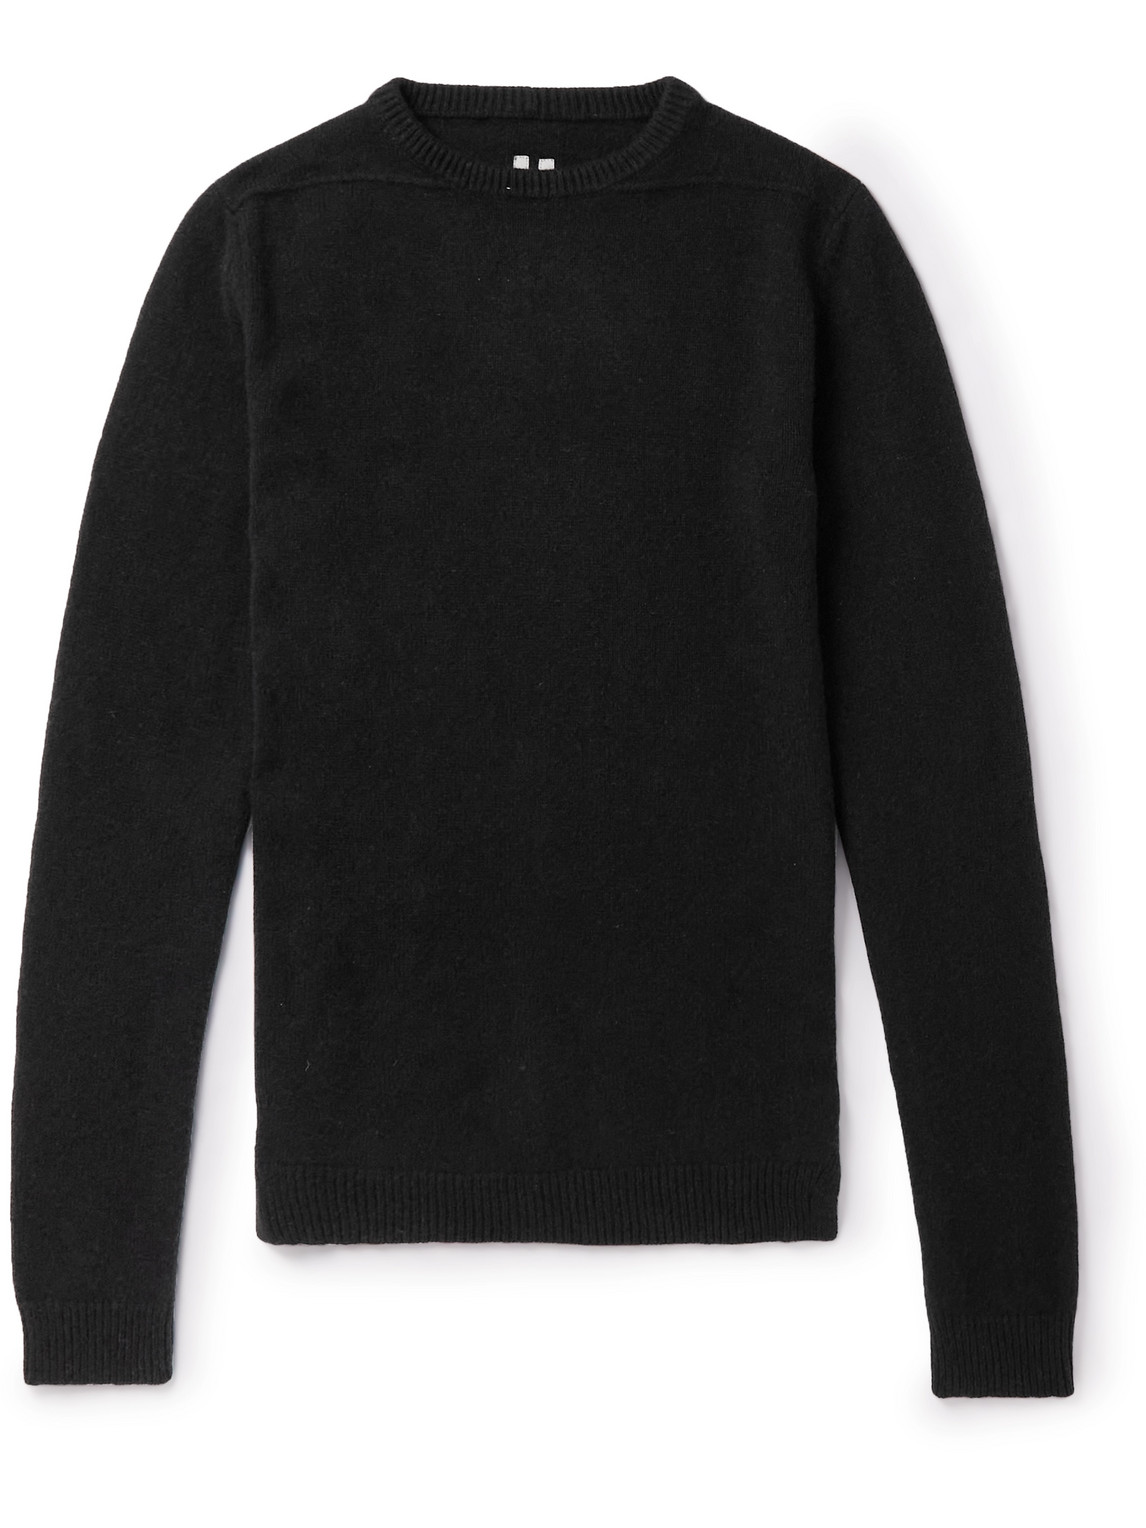 Rick Owens Biker Recycled Cashmere and Wool-Blend Sweater